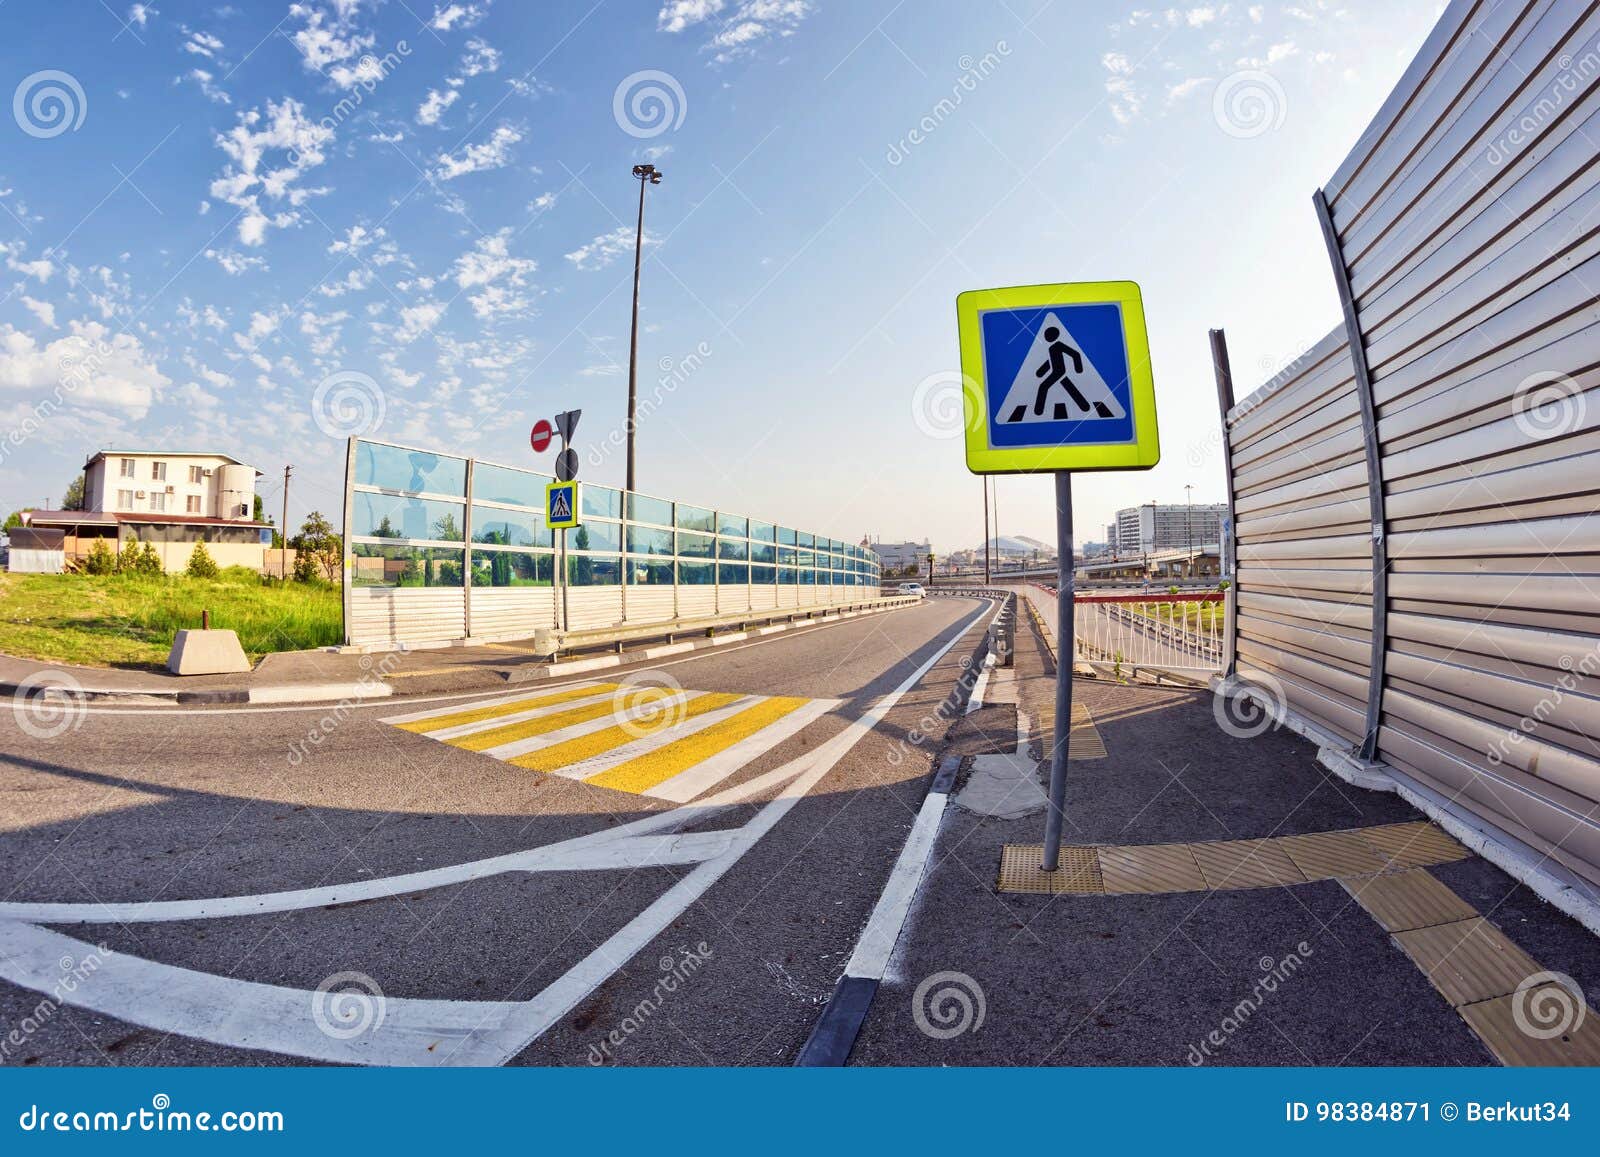 Road Sign Pedestrian Crossing and Markings on the Road Stock Image ...